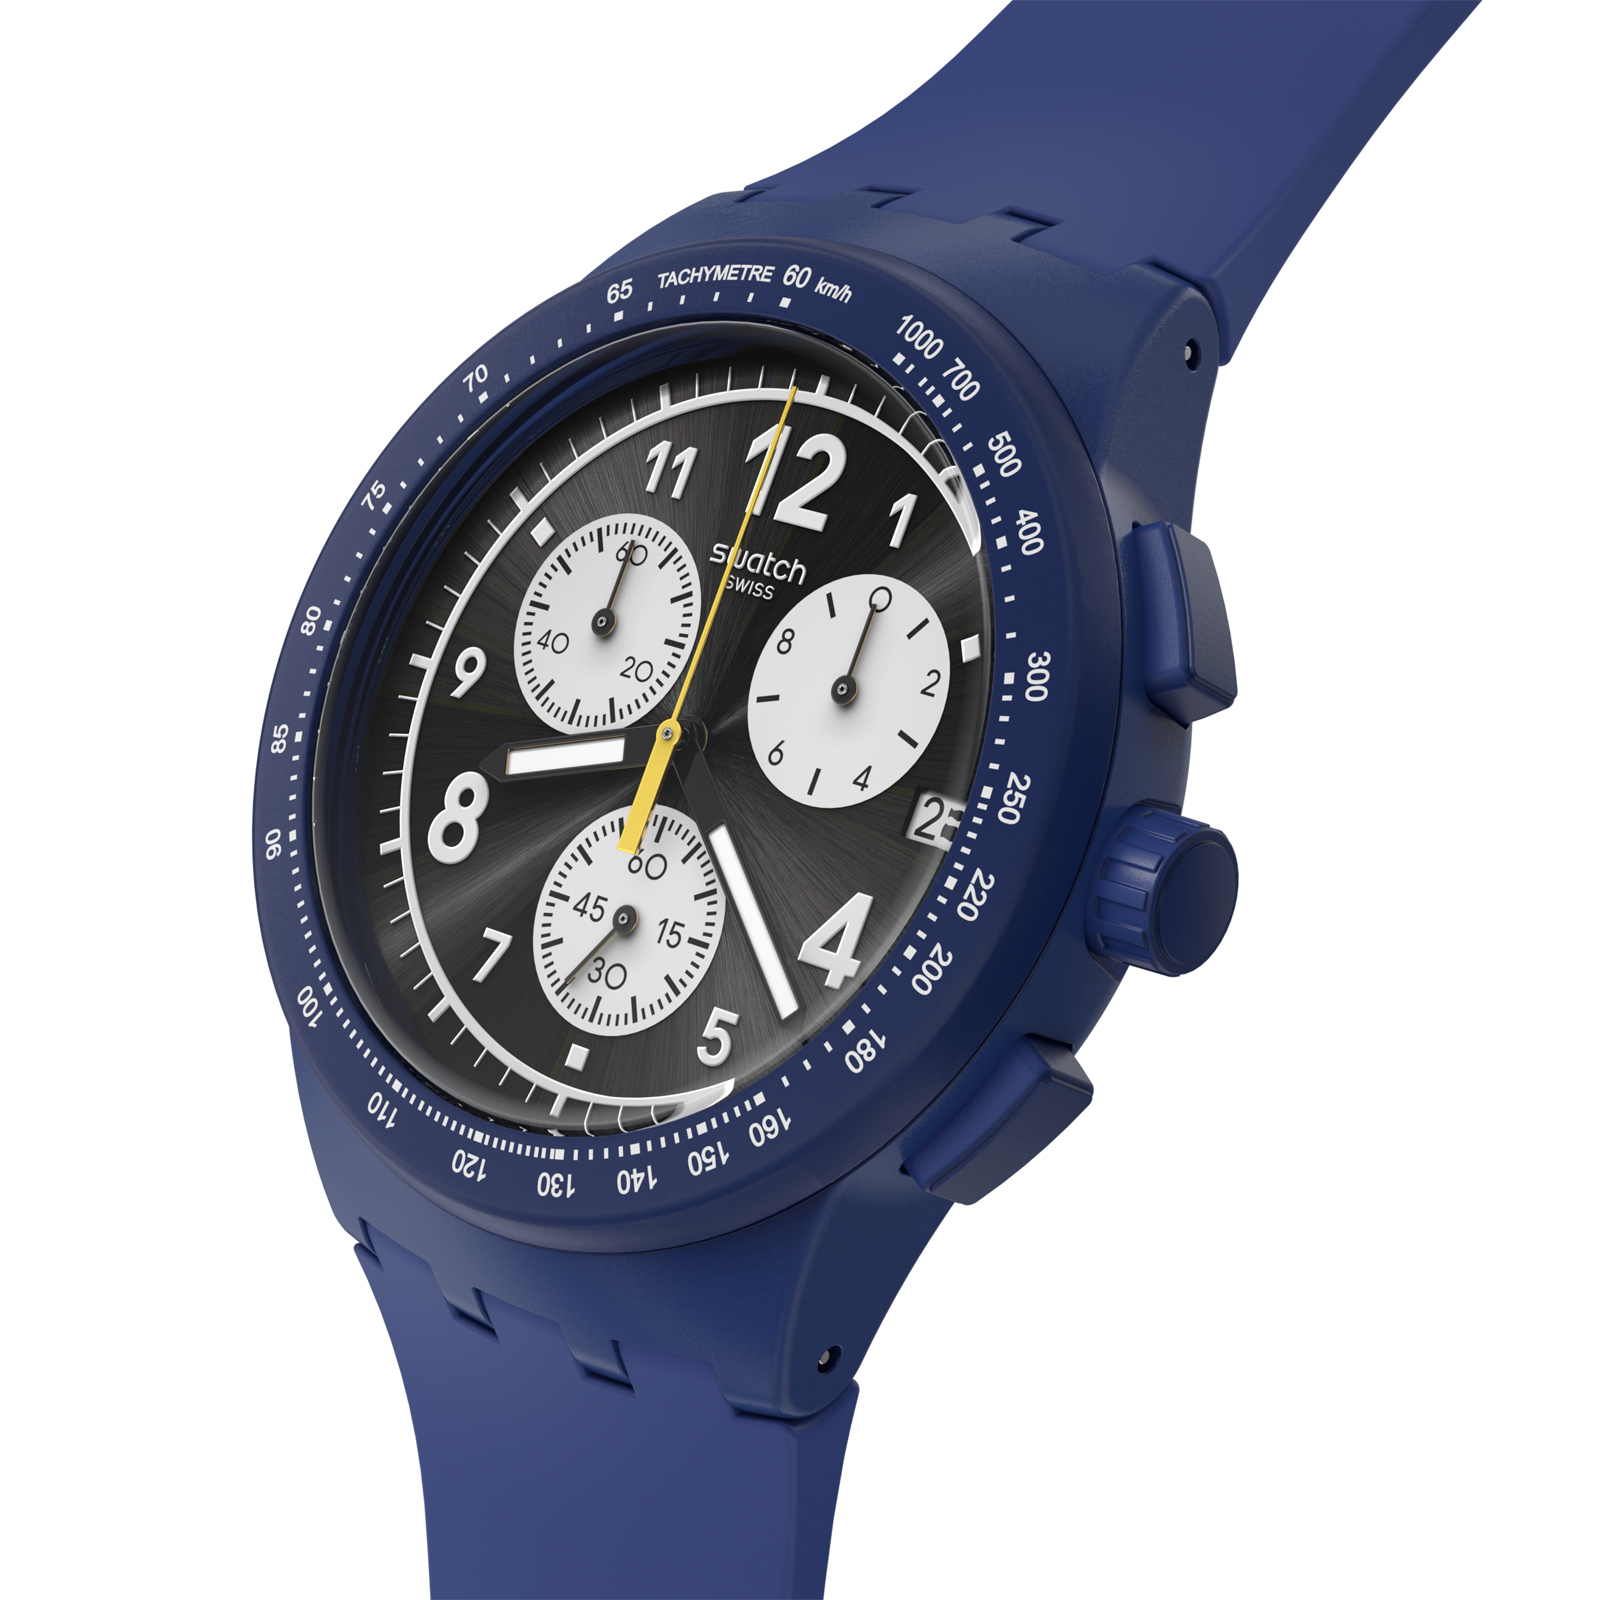 Reloj SWATCH NOTHING BASIC ABOUT BLUE SUSN418 Azul